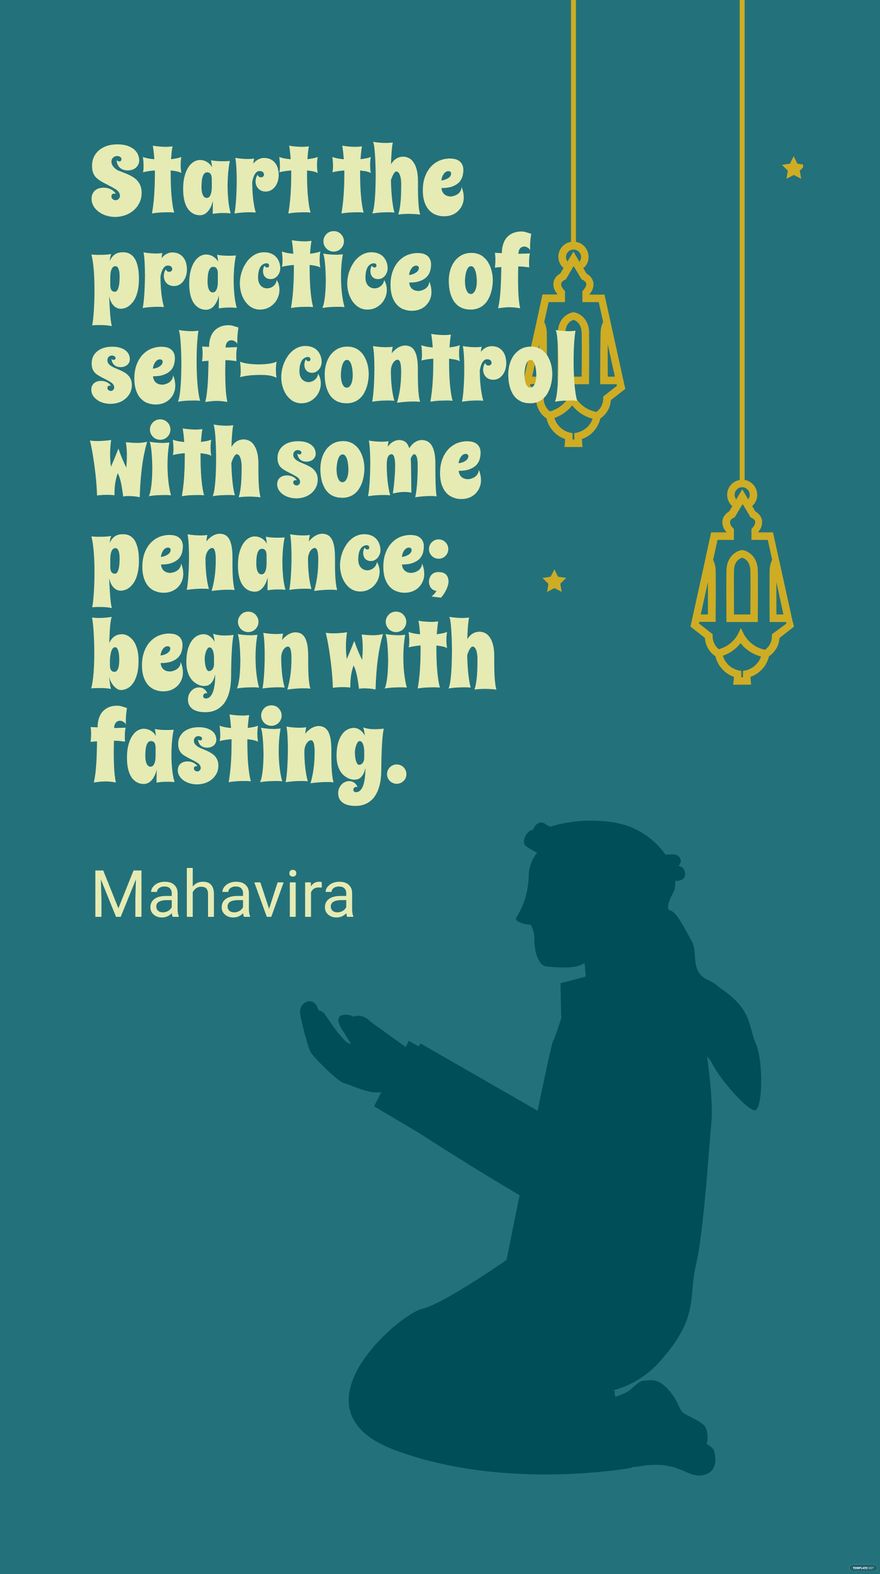 Free Mahavira - Start the practice of self-control with some penance; begin with fasting.